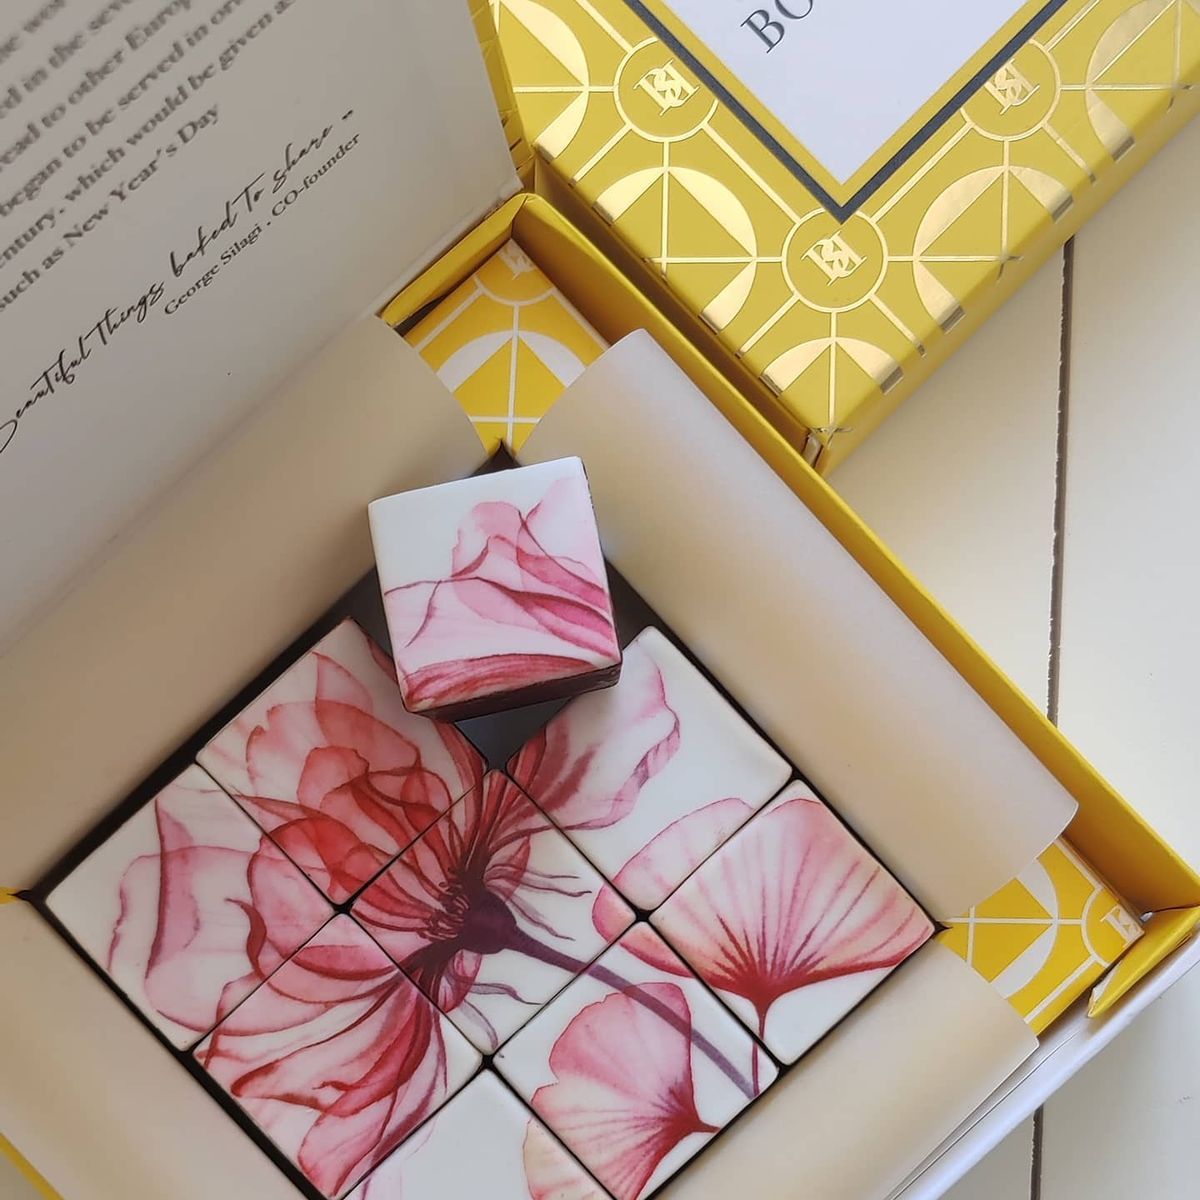 "Welcome to the flavorful revolution of 2024's Indian wedding invitations, where the latest trend of incorporating art chocolates is taking center stage."